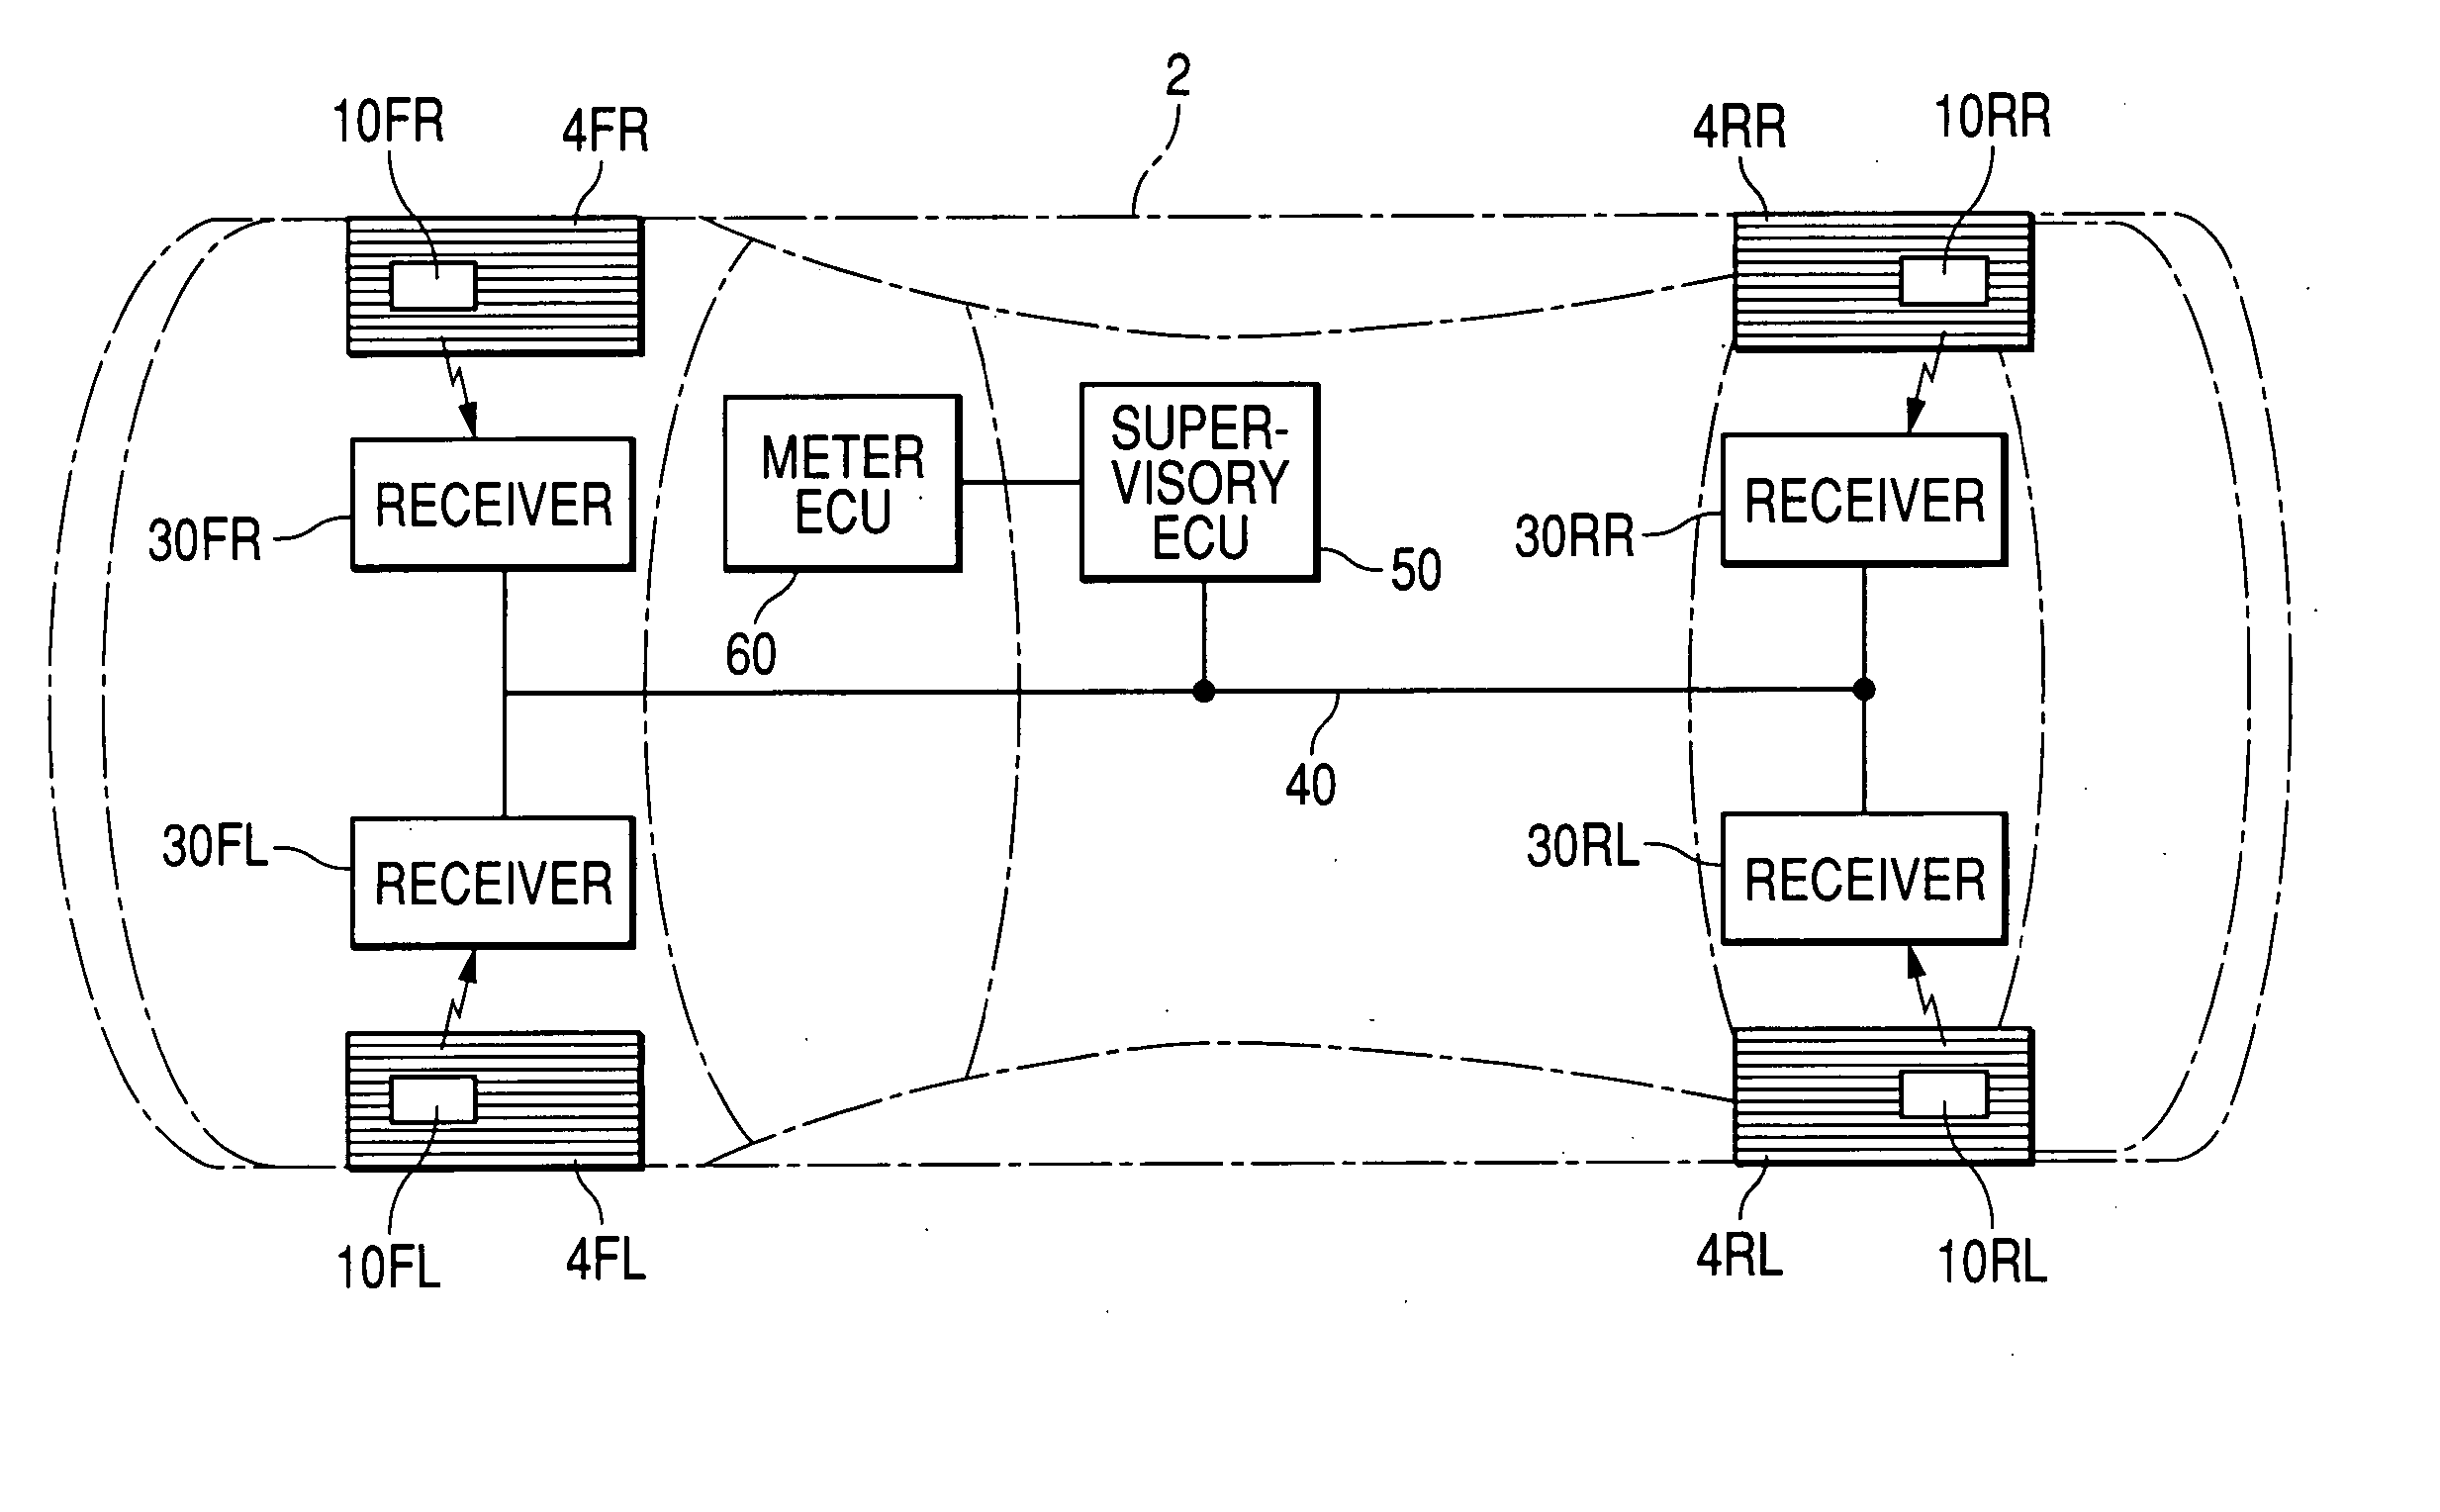 System for communicating between a master device and each of slave devices